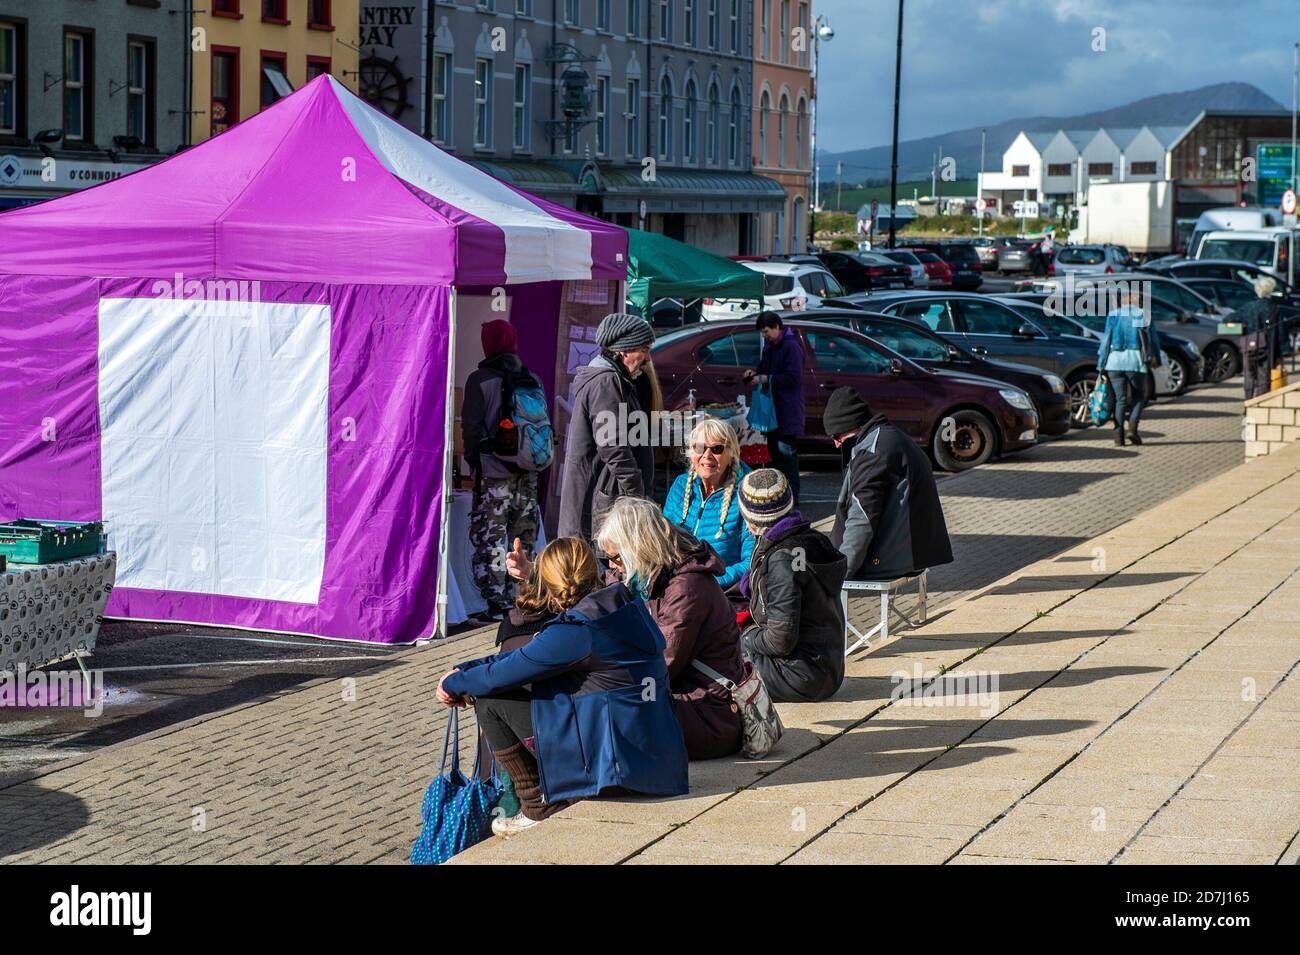 Bantry, West Cork, Ireland. 23rd Oct, 2020. Bantry Friday Market is operating today and is quieter than usual. However, despite Cork County Council stating only stalls selling essential items such as food, many stalls appeared to be selling non-essential items. Credit: AG News/Alamy Live News Stock Photo